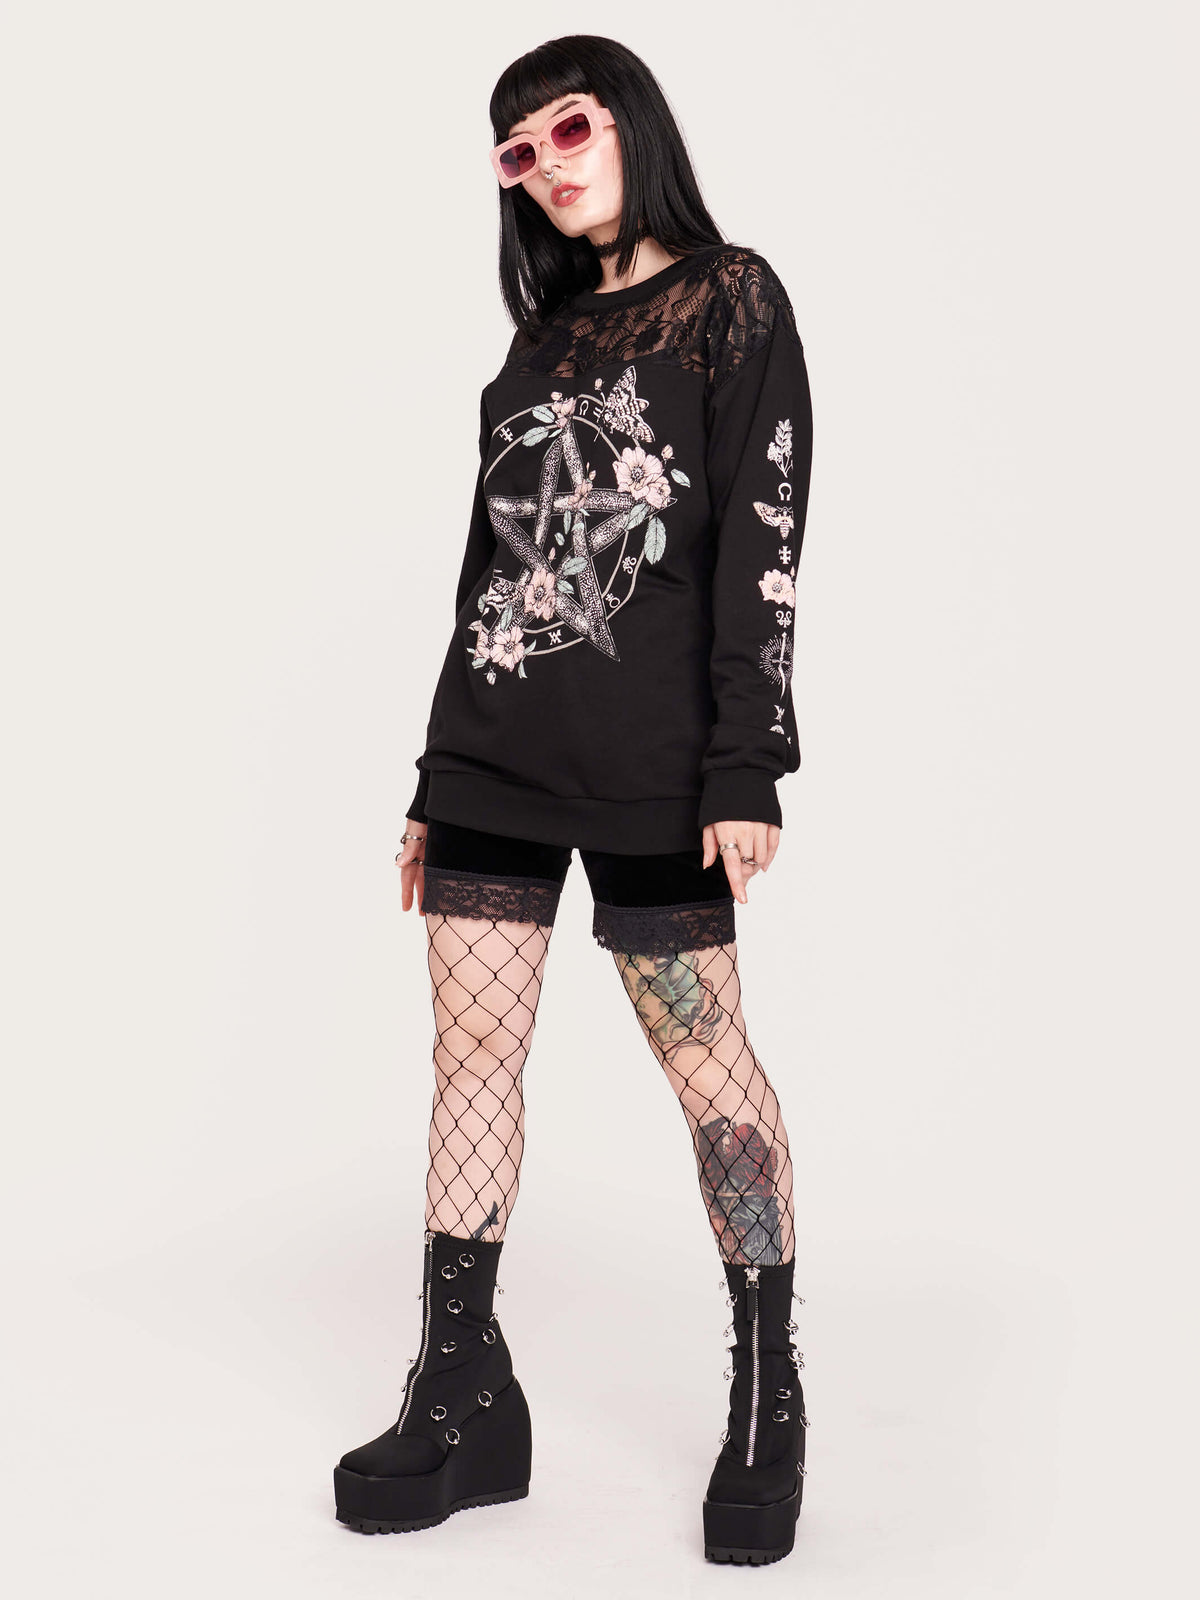 black sweatshirt featuring a deathmoth, pentacle, and magic herbs on the front and arms with black fishnet yoke in front and back.